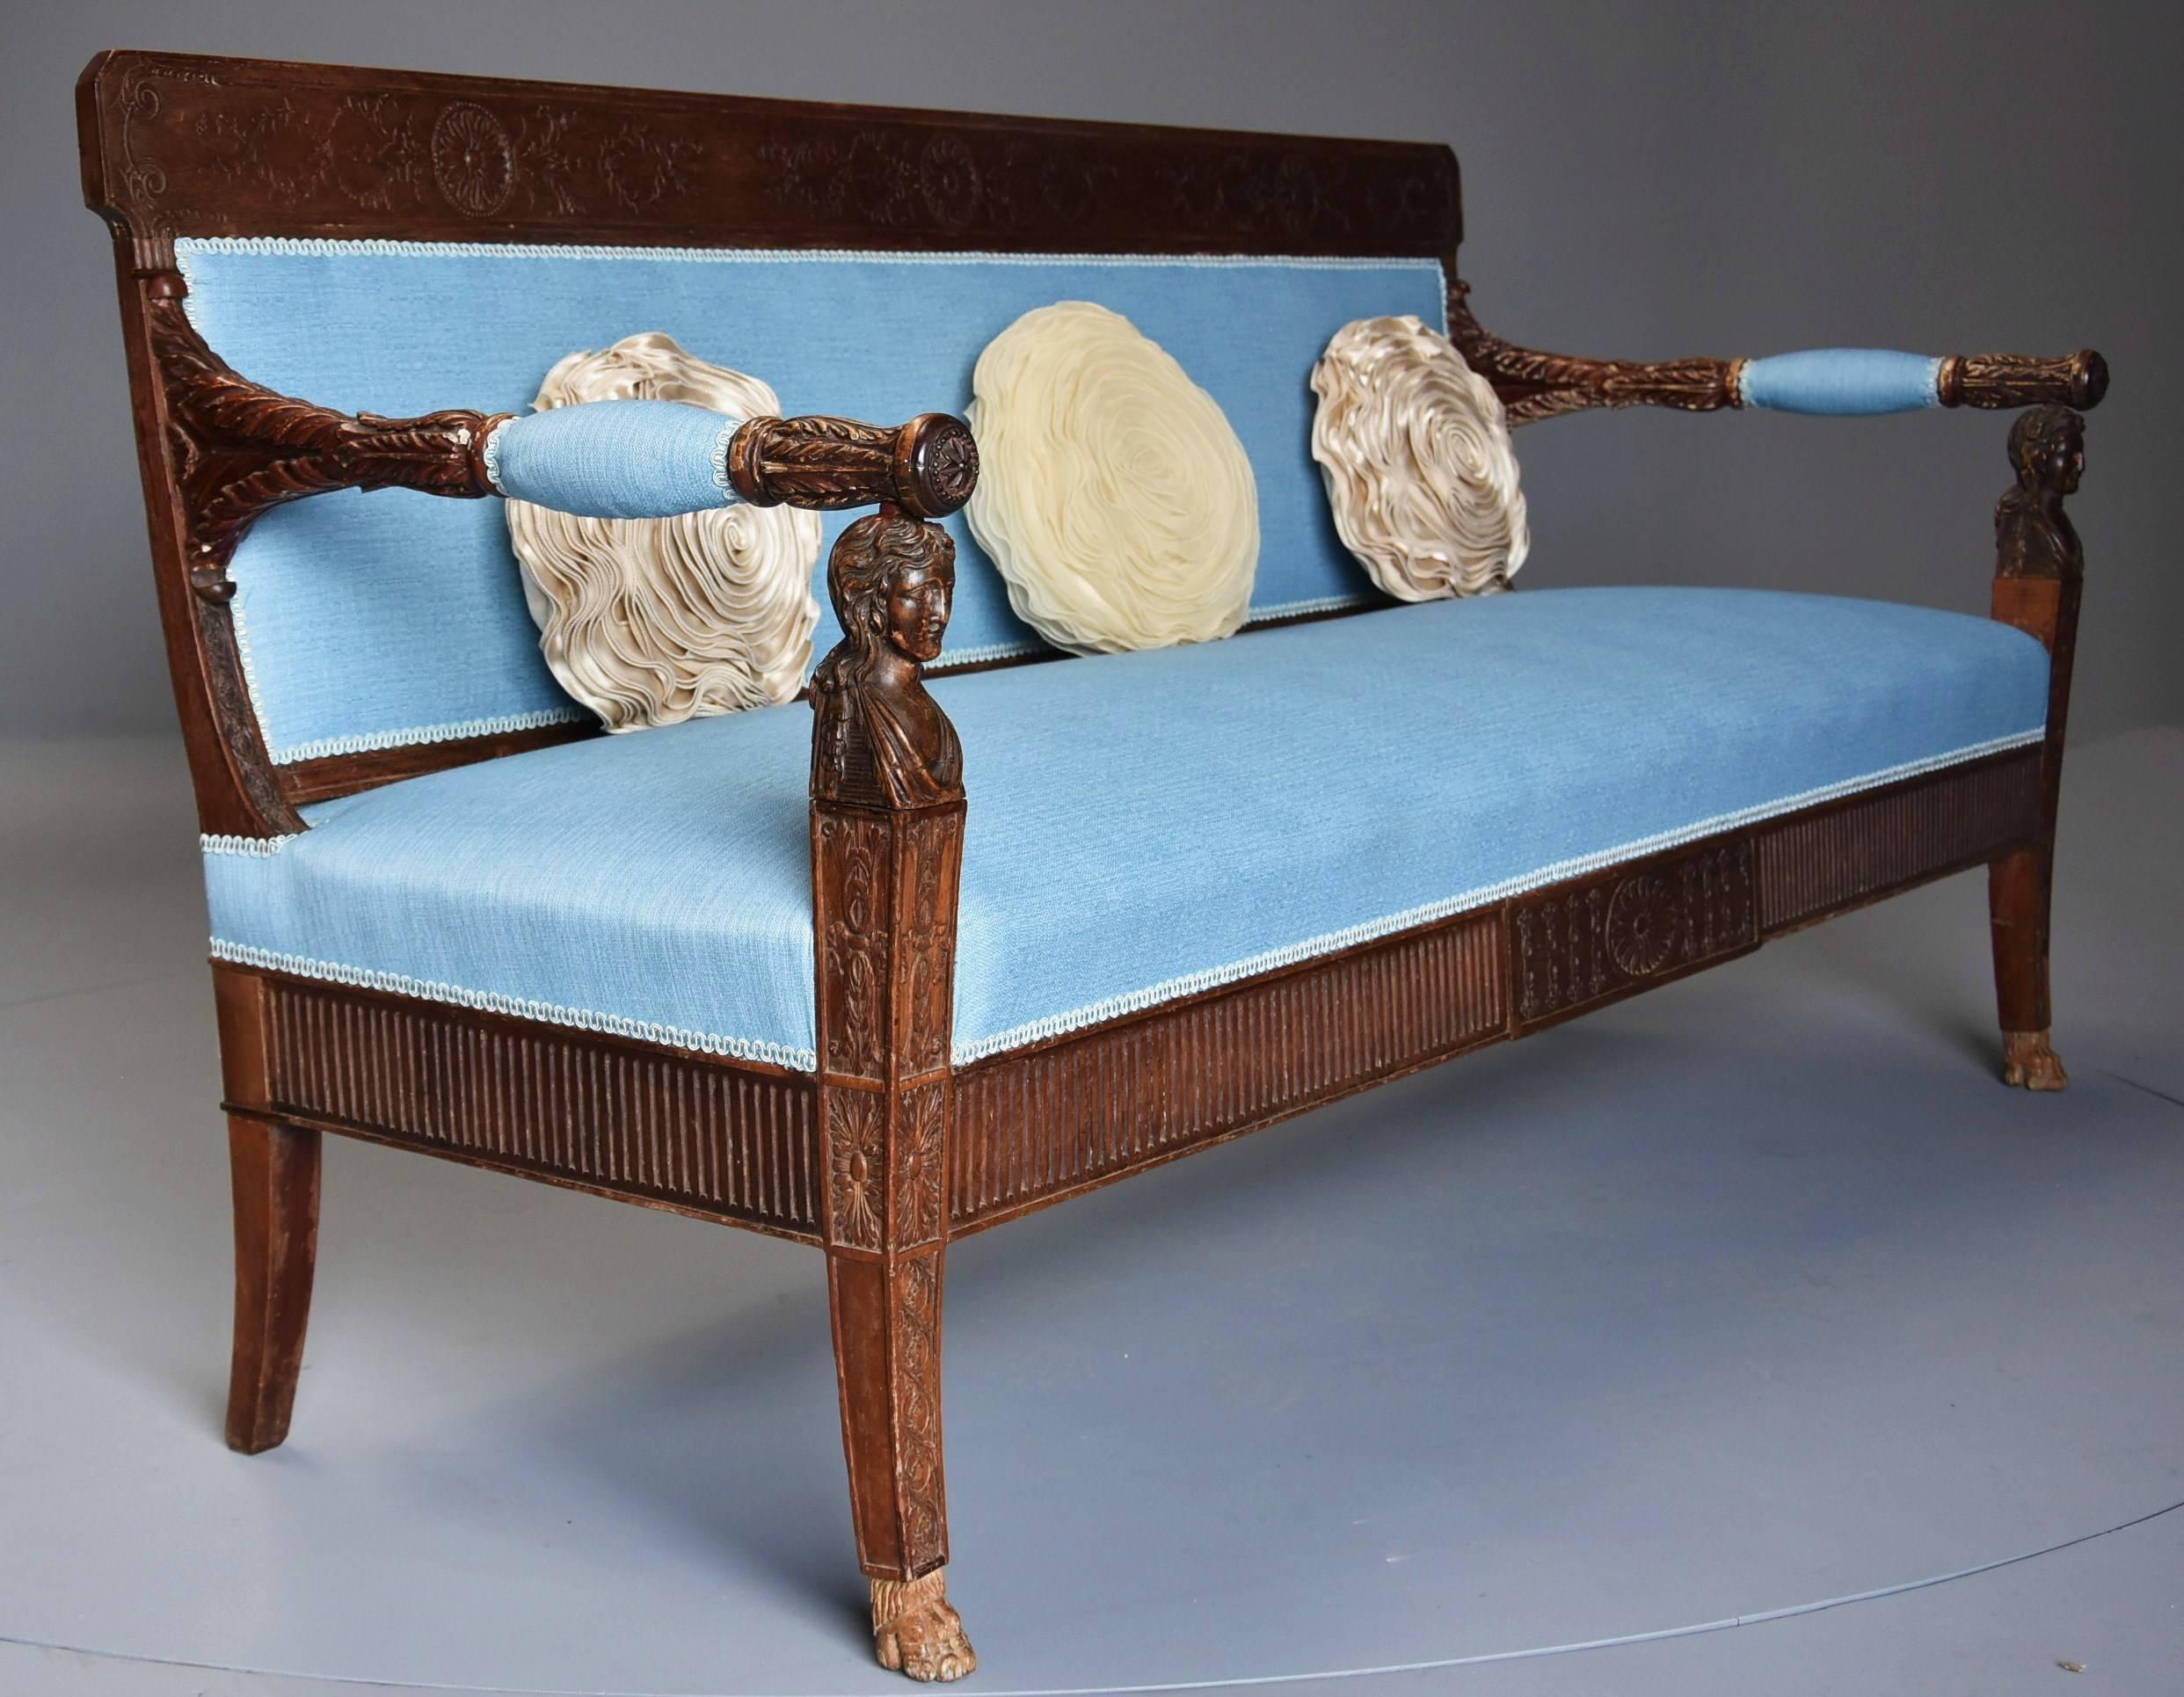 A late 18th century extremely rare walnut Italian sofa or canapé of neoclassical design retaining some of the original polychrome paint finish.

The sofa consists of a top rail finely carved with three medallions with carved foliate decoration